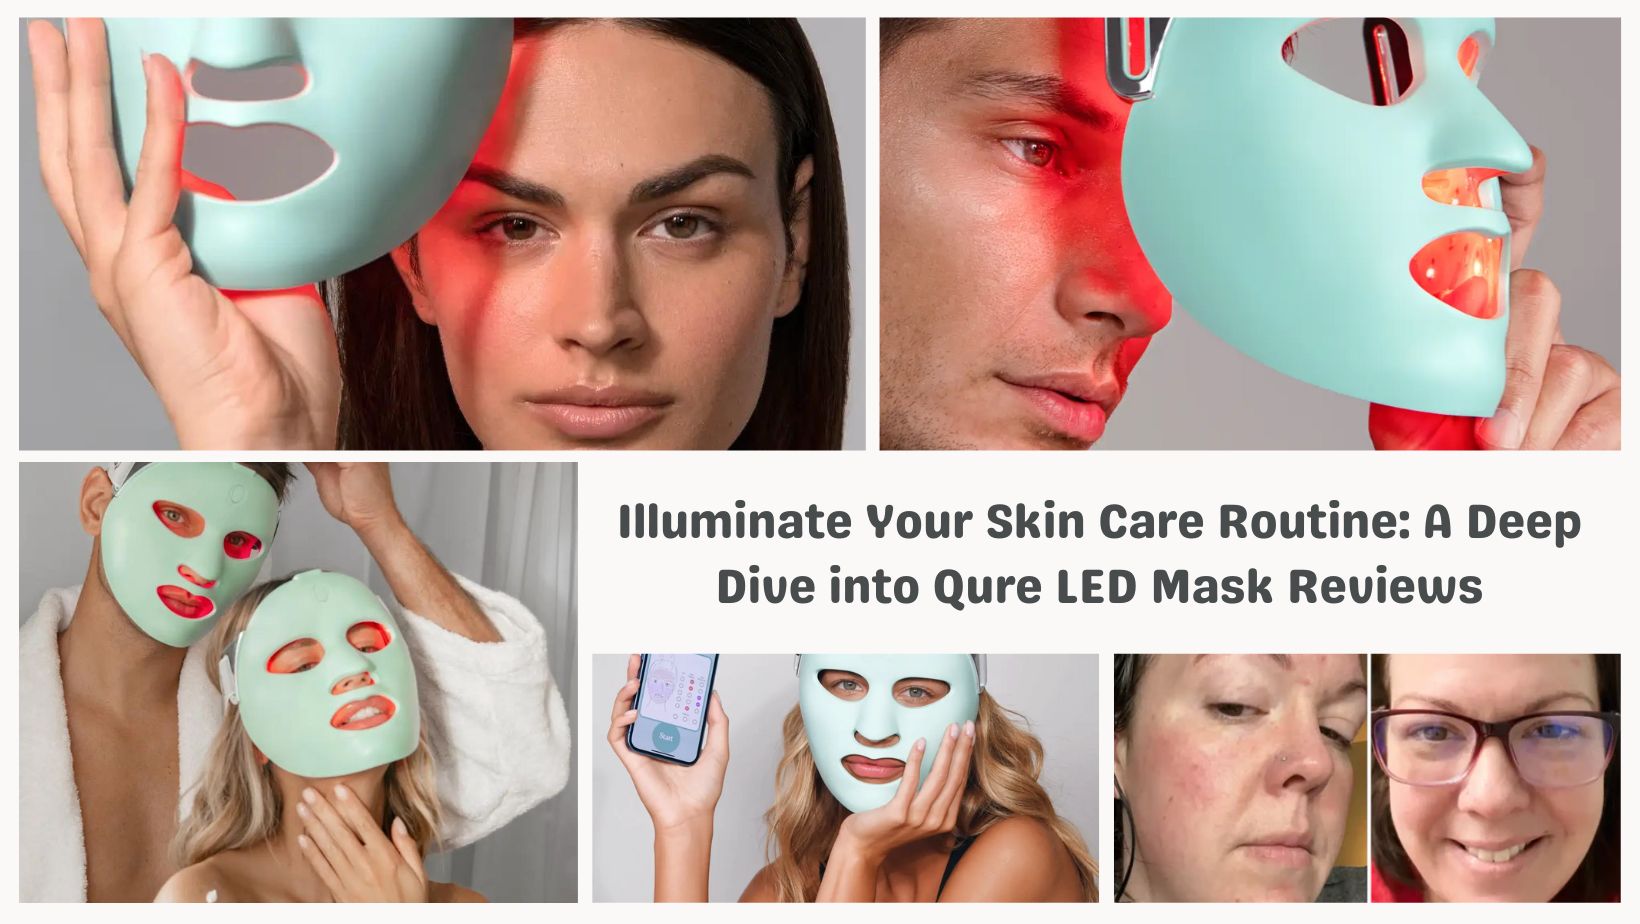 Illuminate Your Skin Care Routine A Deep Dive into Qure LED Mask Reviews